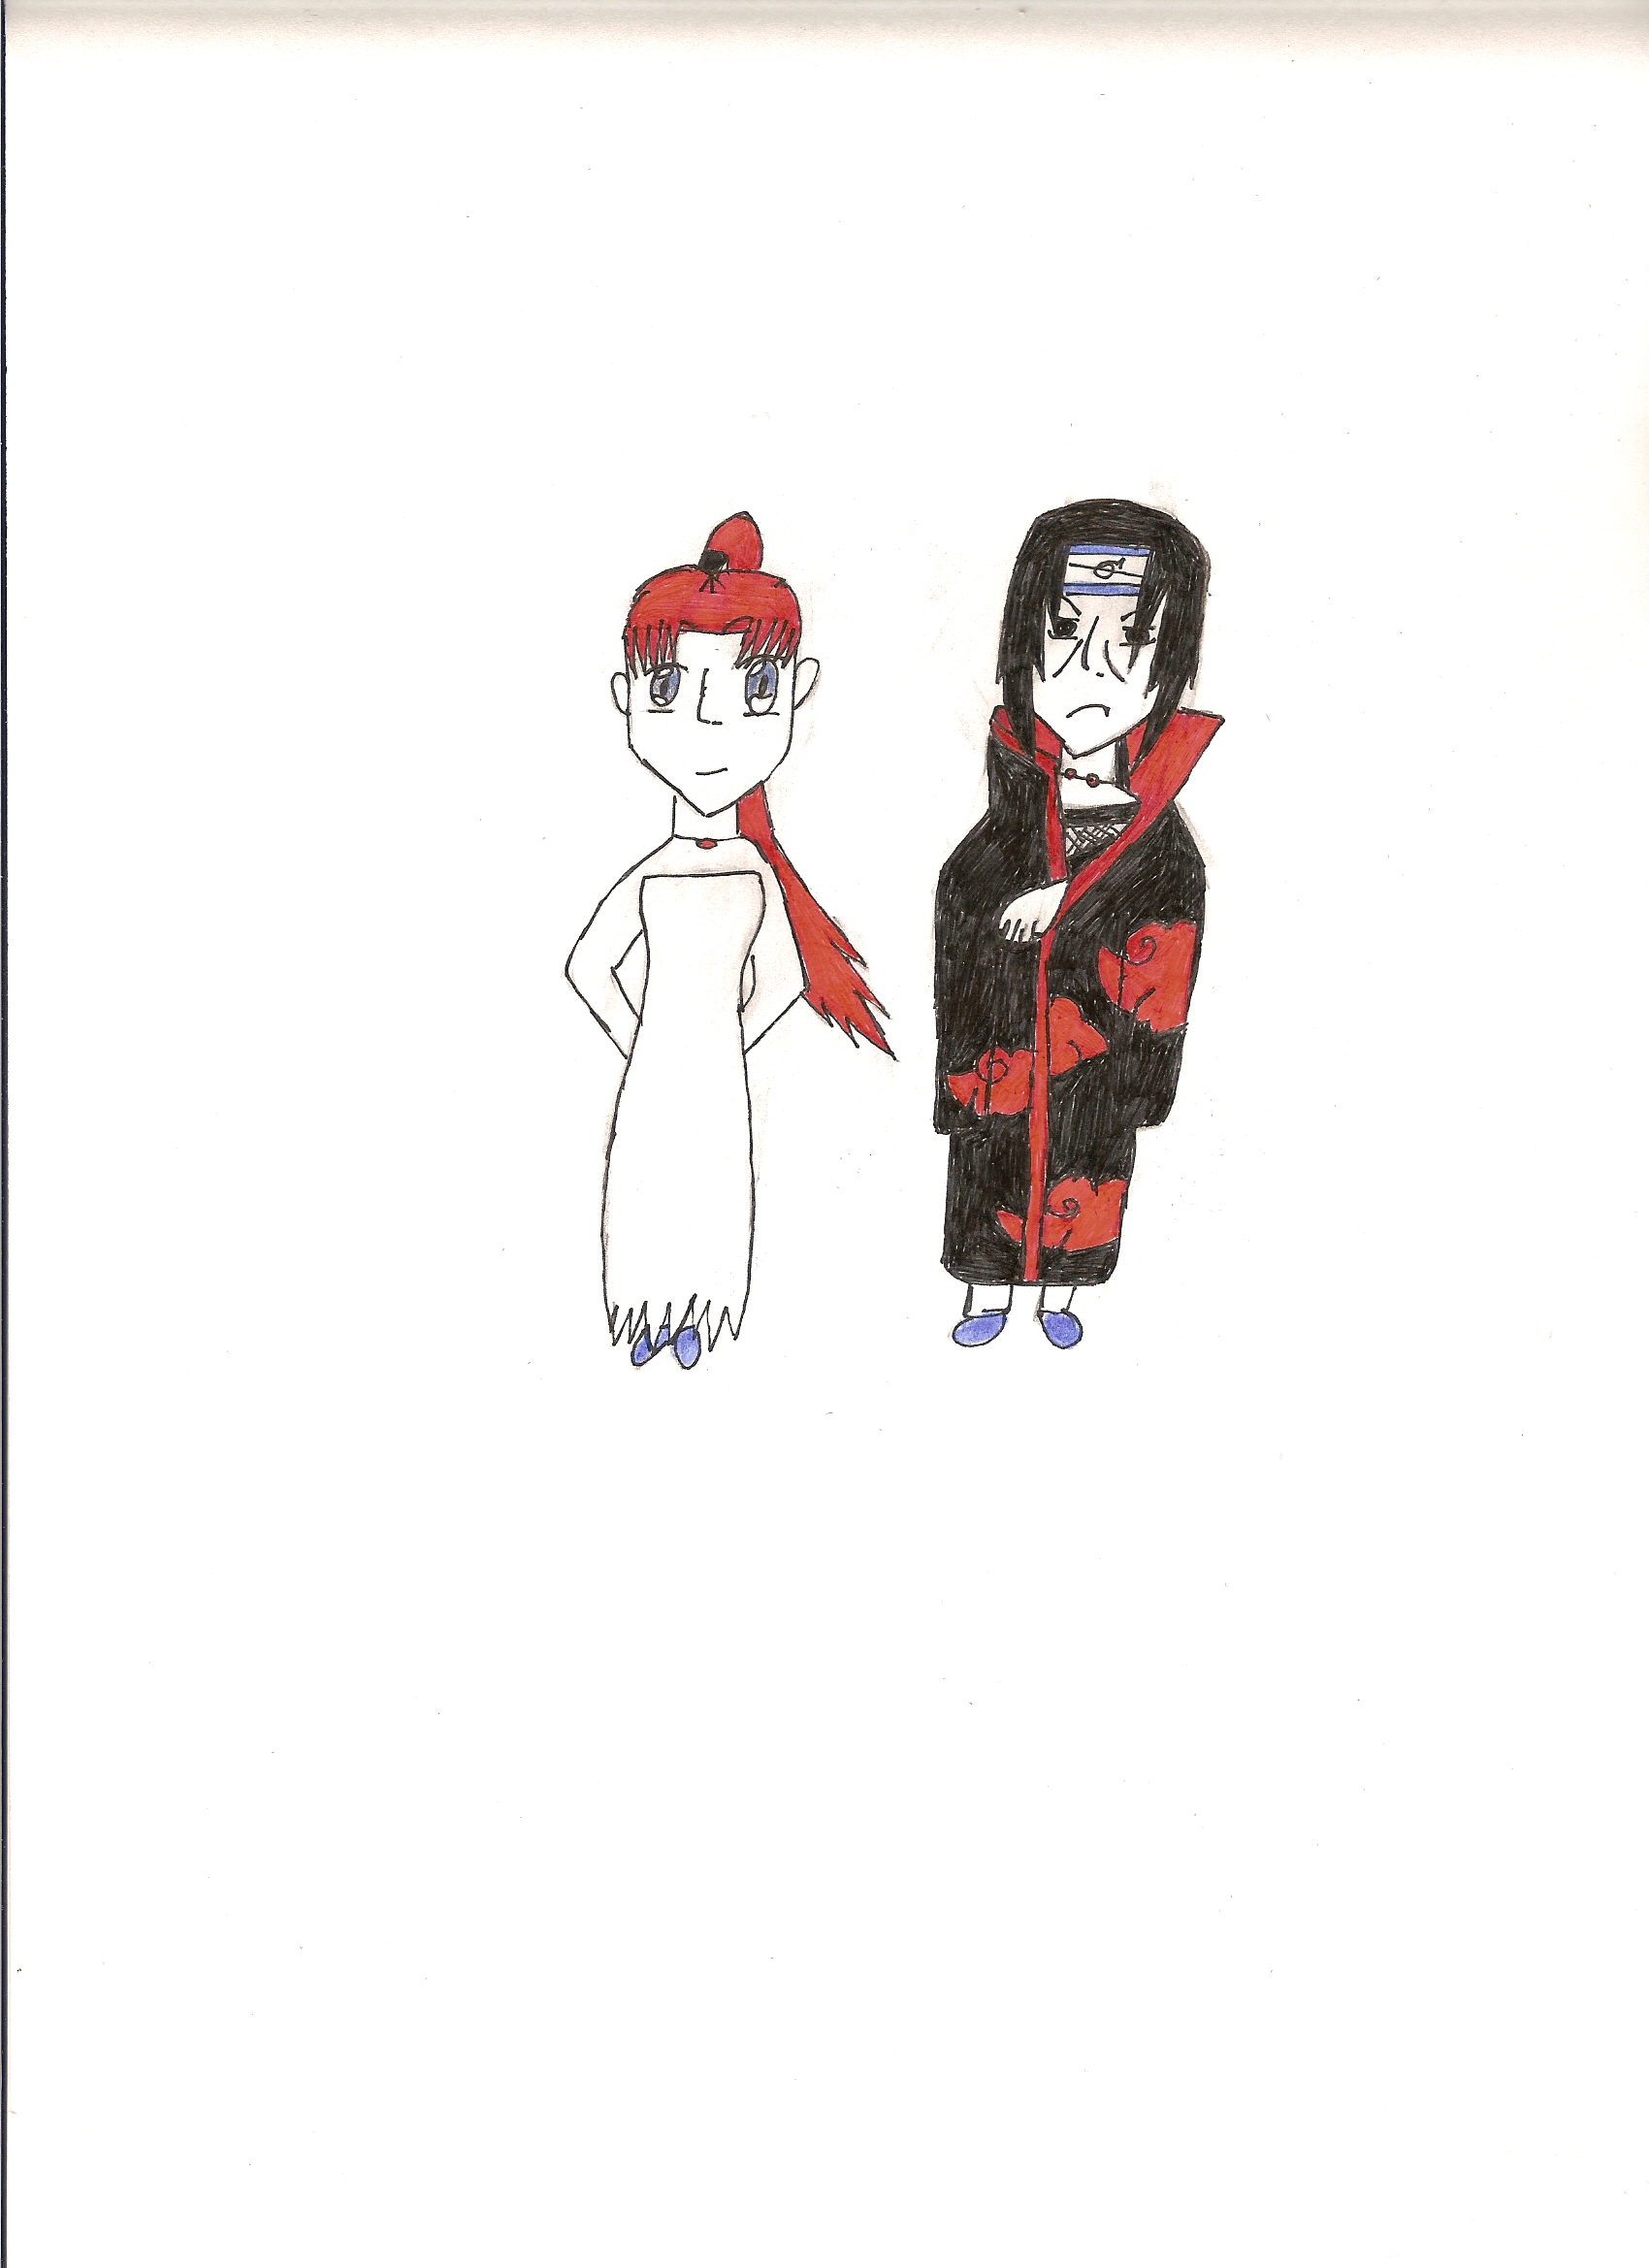 Naomi and Itachi by sonia555220